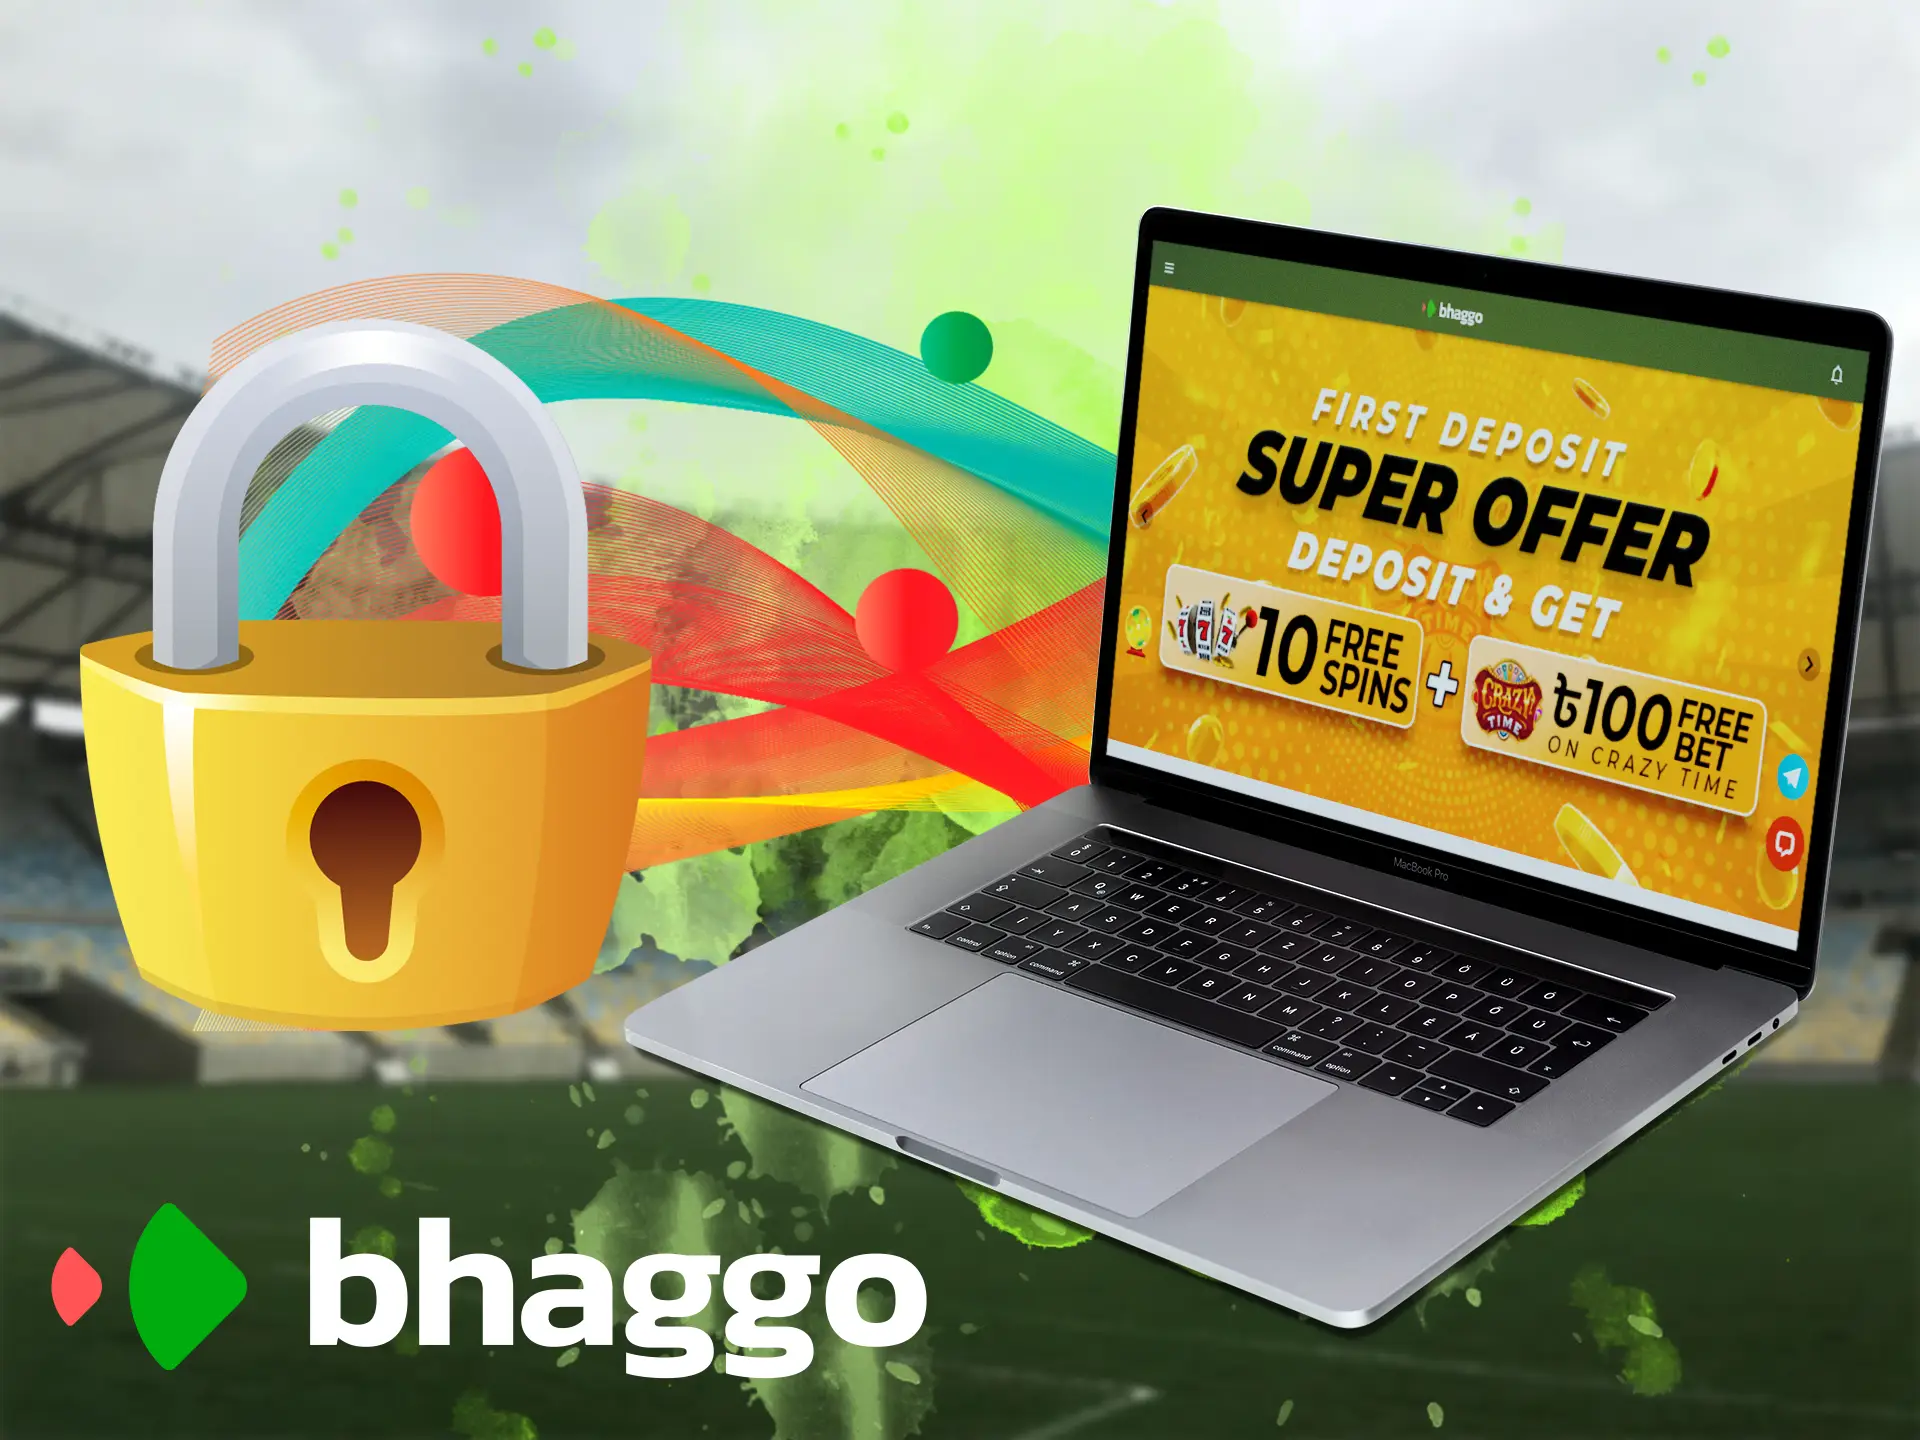 Bhaggo will strictly safeguard your personal data, provide up-to-date information security methods.